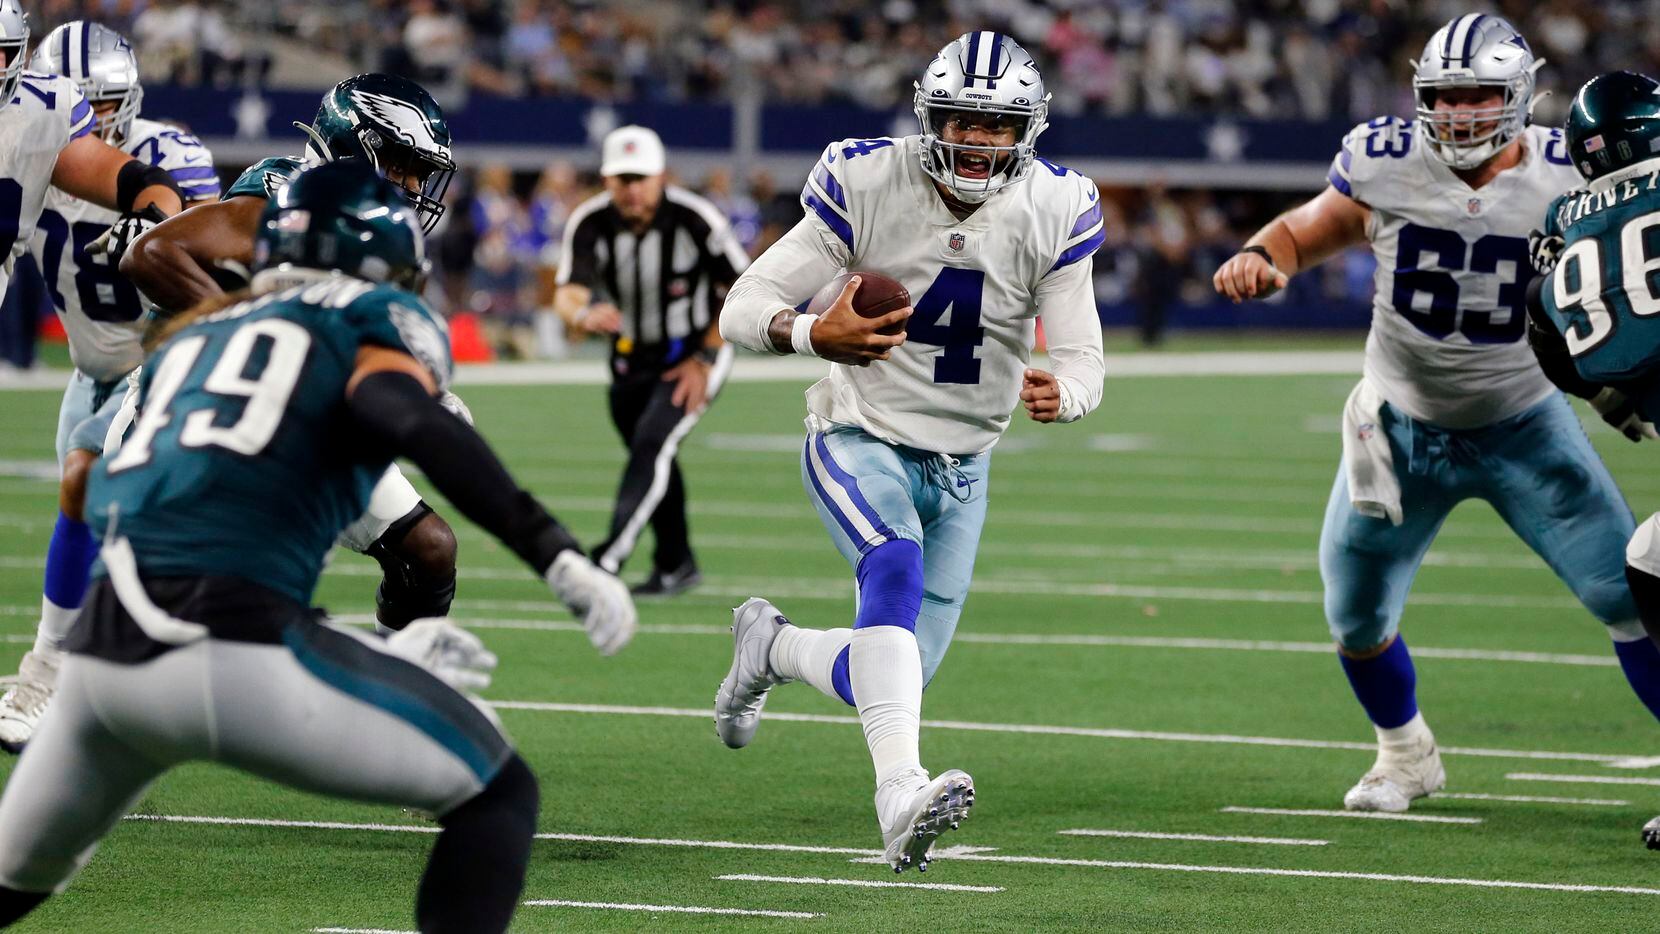 Dallas Cowboys quarterback Dak Prescott (4) scrambles to the two-yard-line during the second half of a NFL football game against the Philadelphia Eagles High at AT&T Stadium in Arlington on Monday, September 27, 2021. (John F. Rhodes / Special Contributor) 